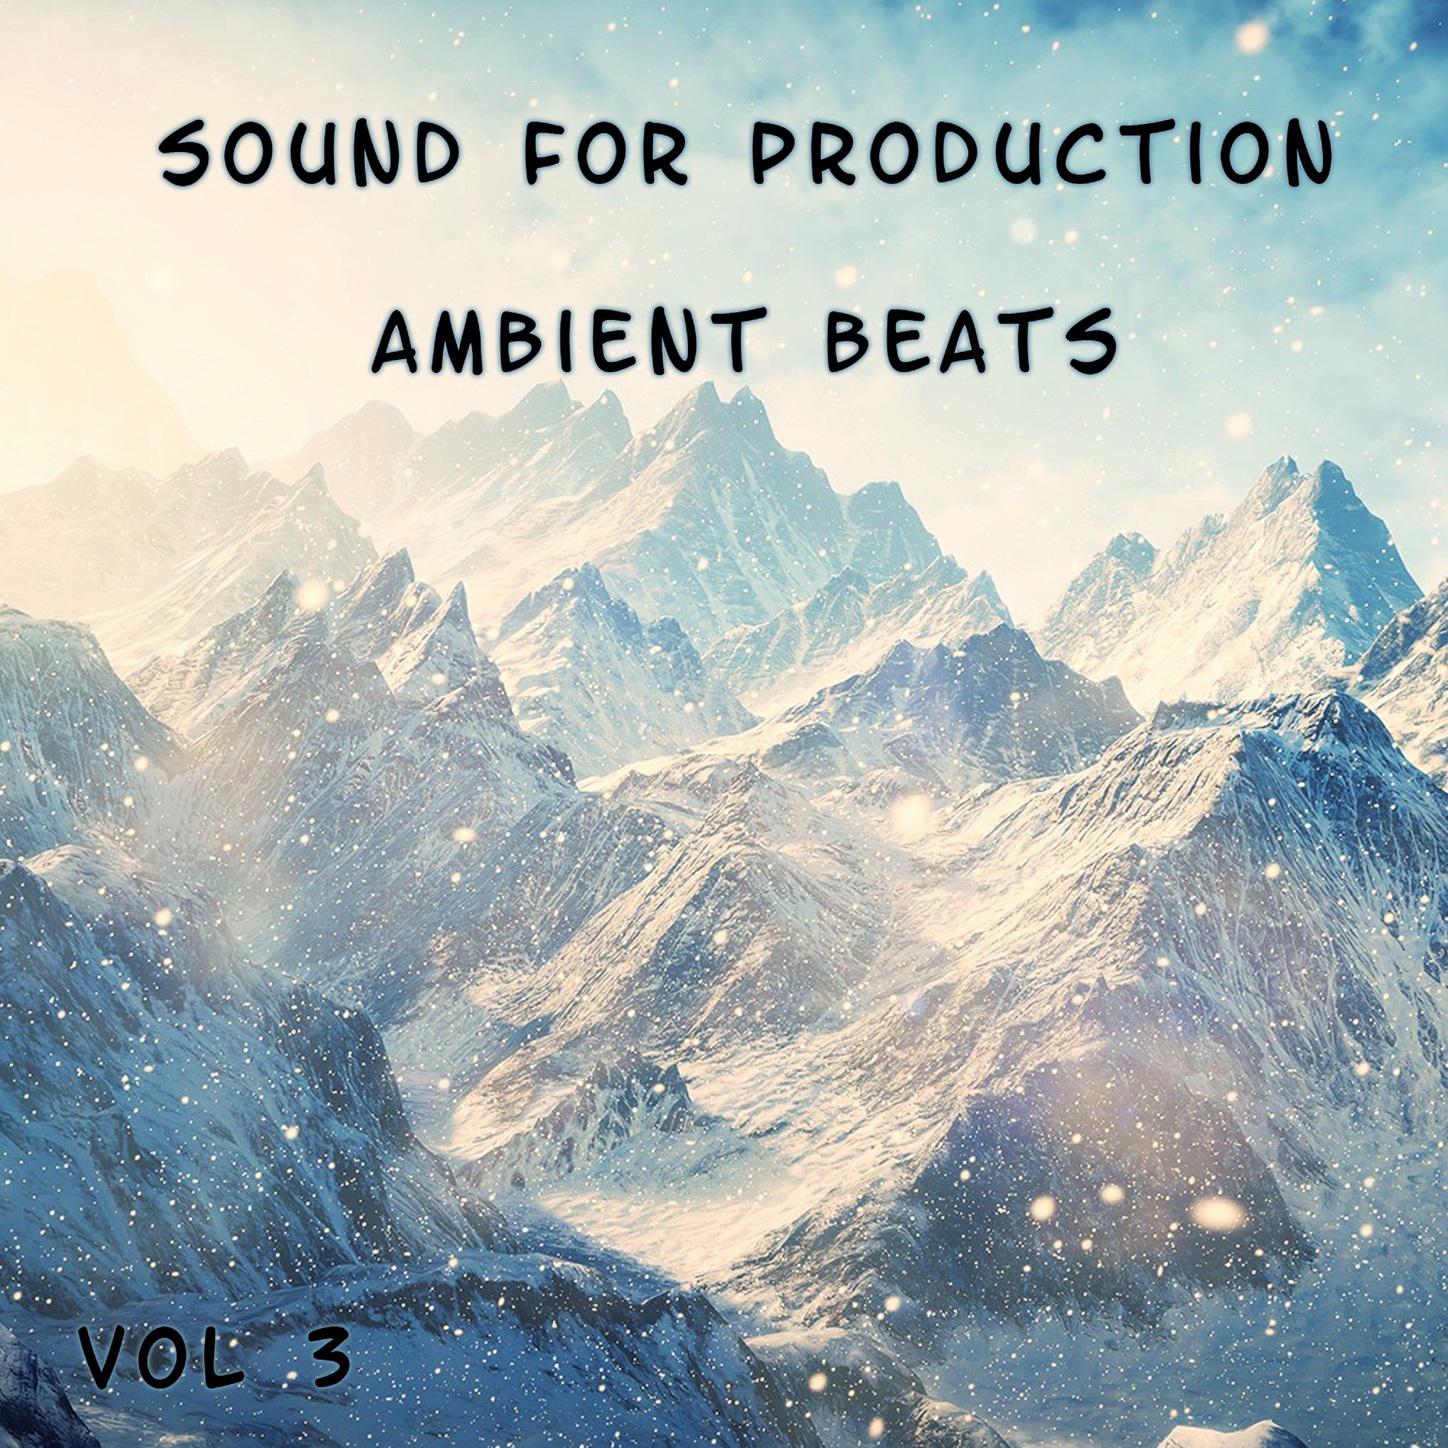 Sound For Production Ambient Beats, Vol. 3